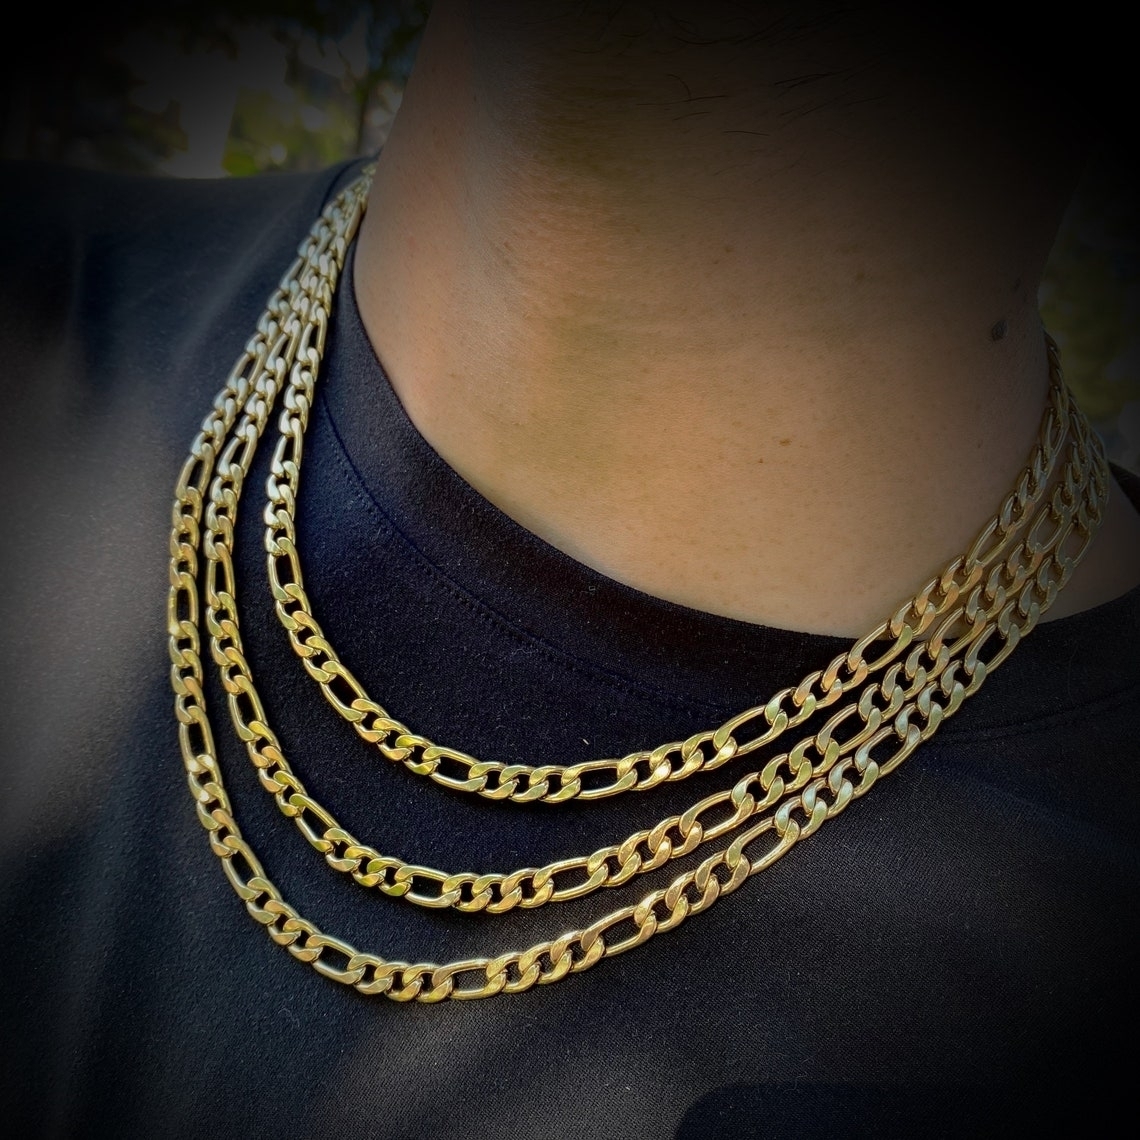 4mm Figaro Chain Necklace Yellow Gold Filled High Polish Finsh - Yellow